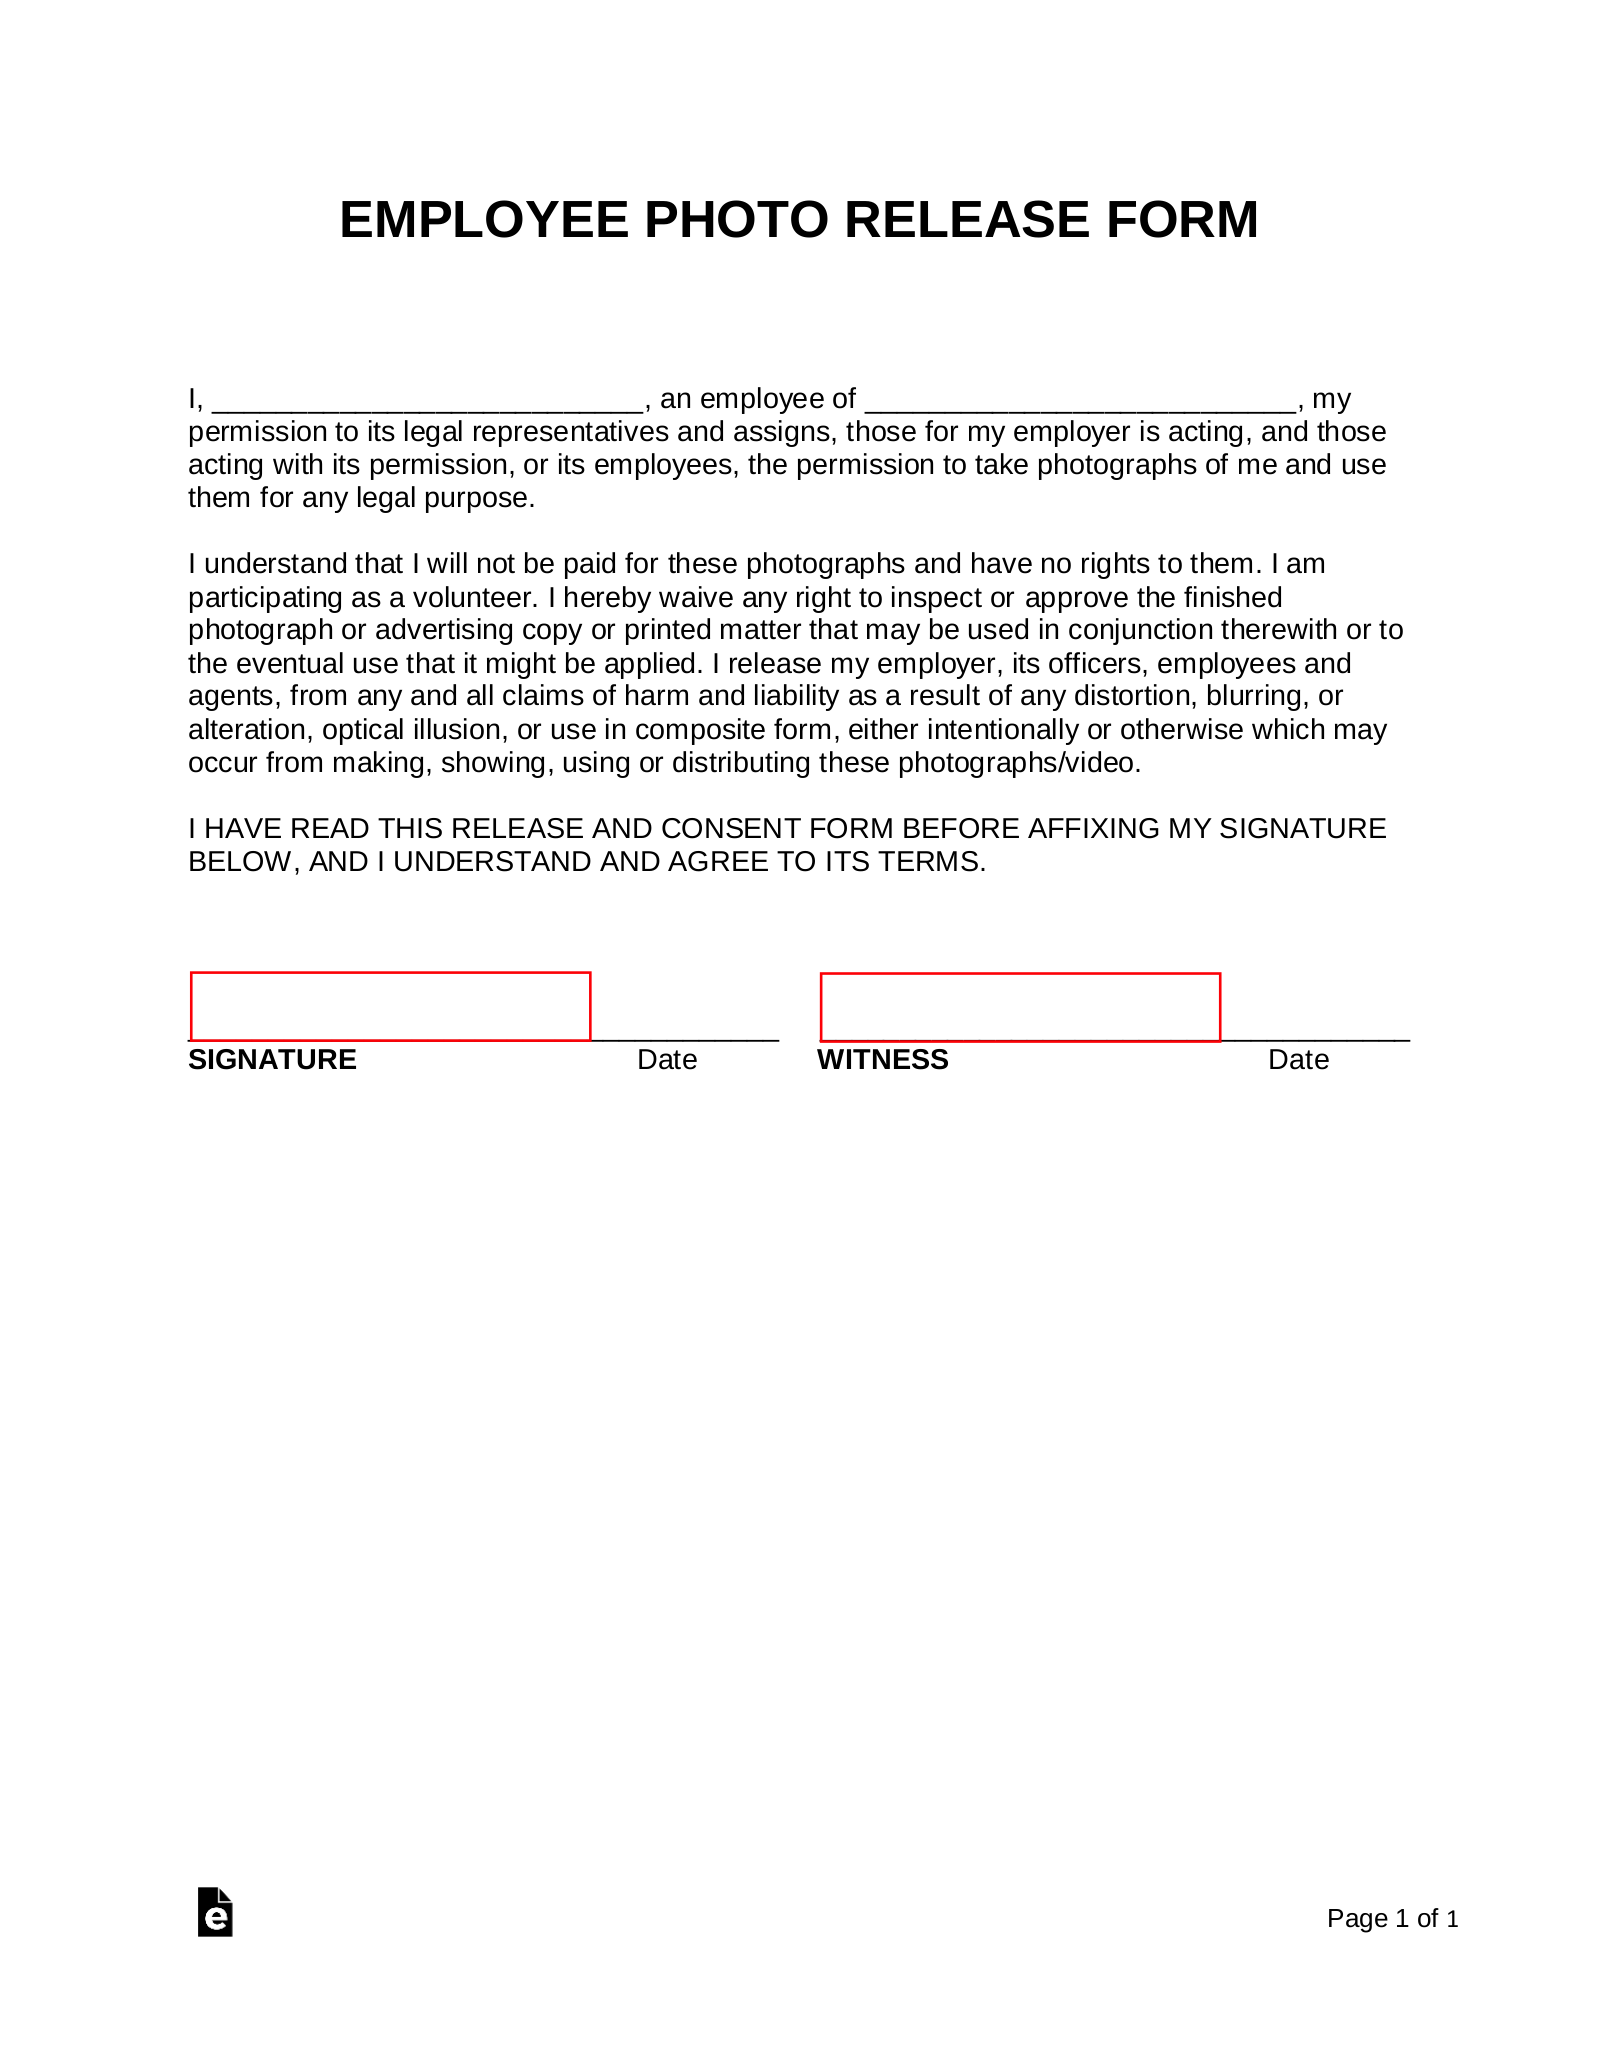 Employee Photo Release Form